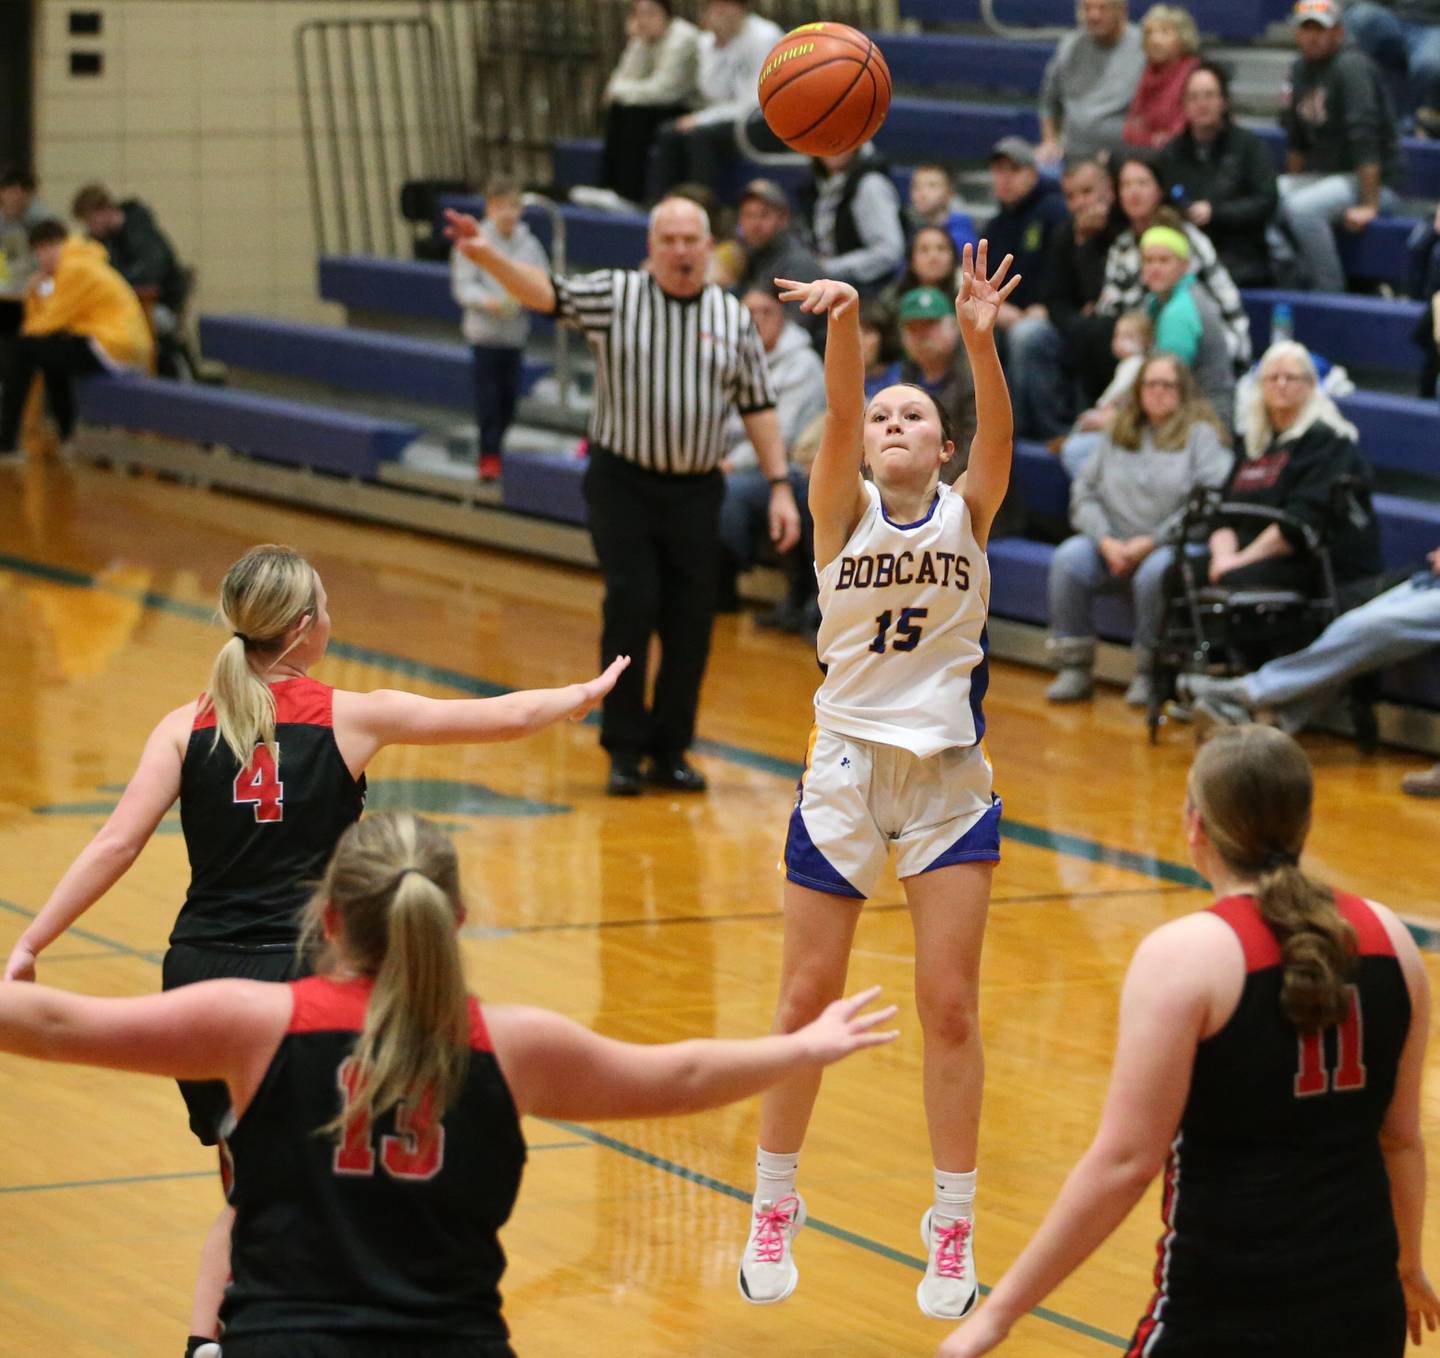 Somonauk's Josie Rader shoots a wide-open jump shot over Earlville in a Little Ten Conference game in Somonauk two seasons ago.